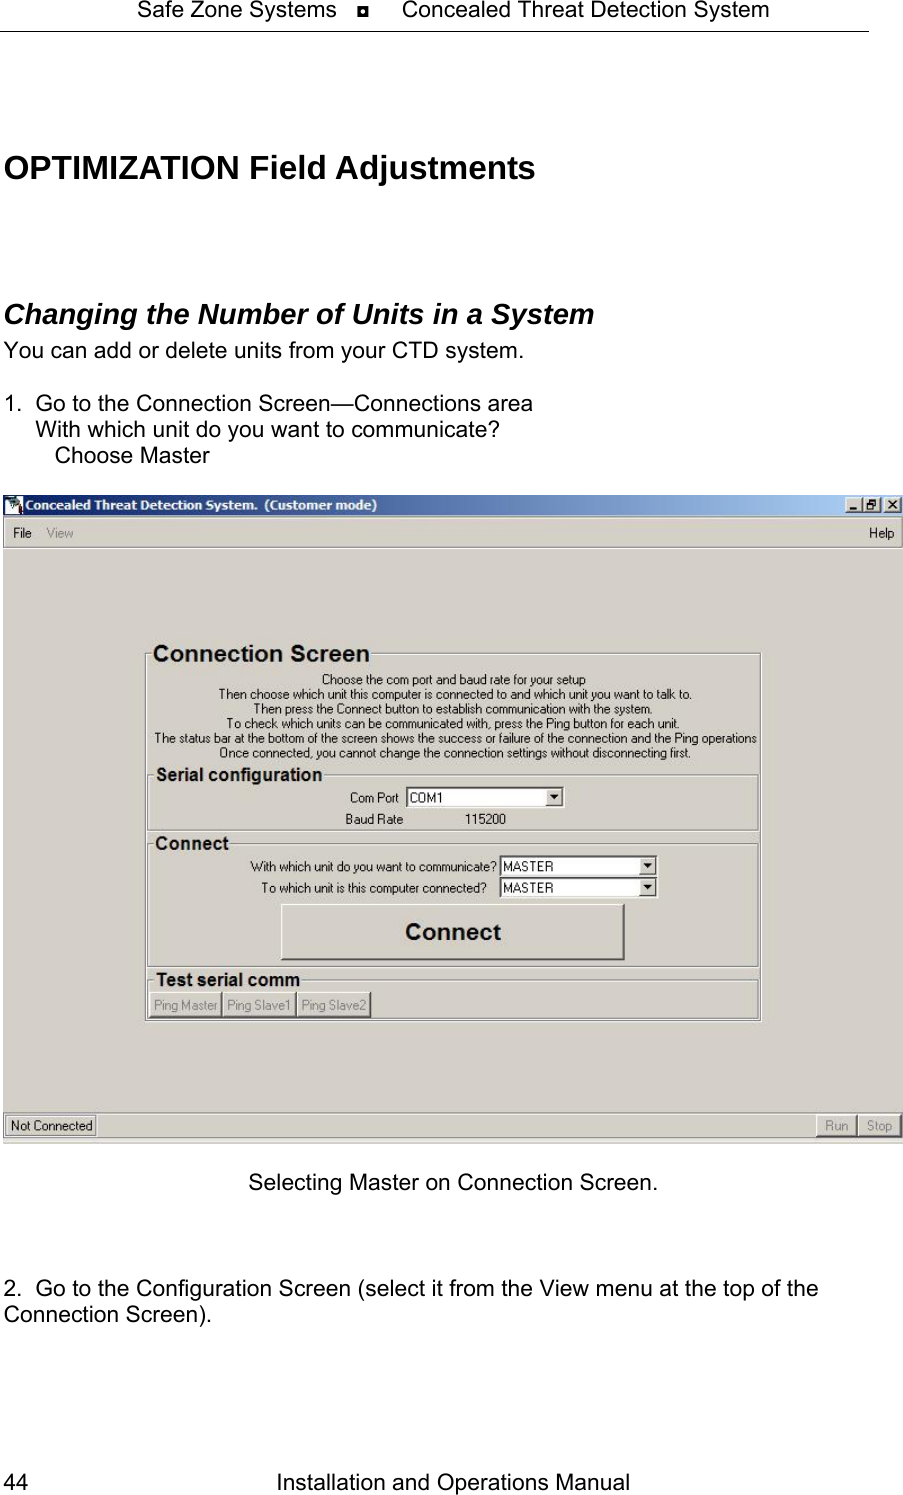 Safe Zone Systems   ◘     Concealed Threat Detection System    OPTIMIZATION Field Adjustments    Changing the Number of Units in a System  You can add or delete units from your CTD system.  1.  Go to the Connection Screen—Connections area      With which unit do you want to communicate?            Choose Master   Selecting Master on Connection Screen.    2.  Go to the Configuration Screen (select it from the View menu at the top of the Connection Screen). Installation and Operations Manual 44 